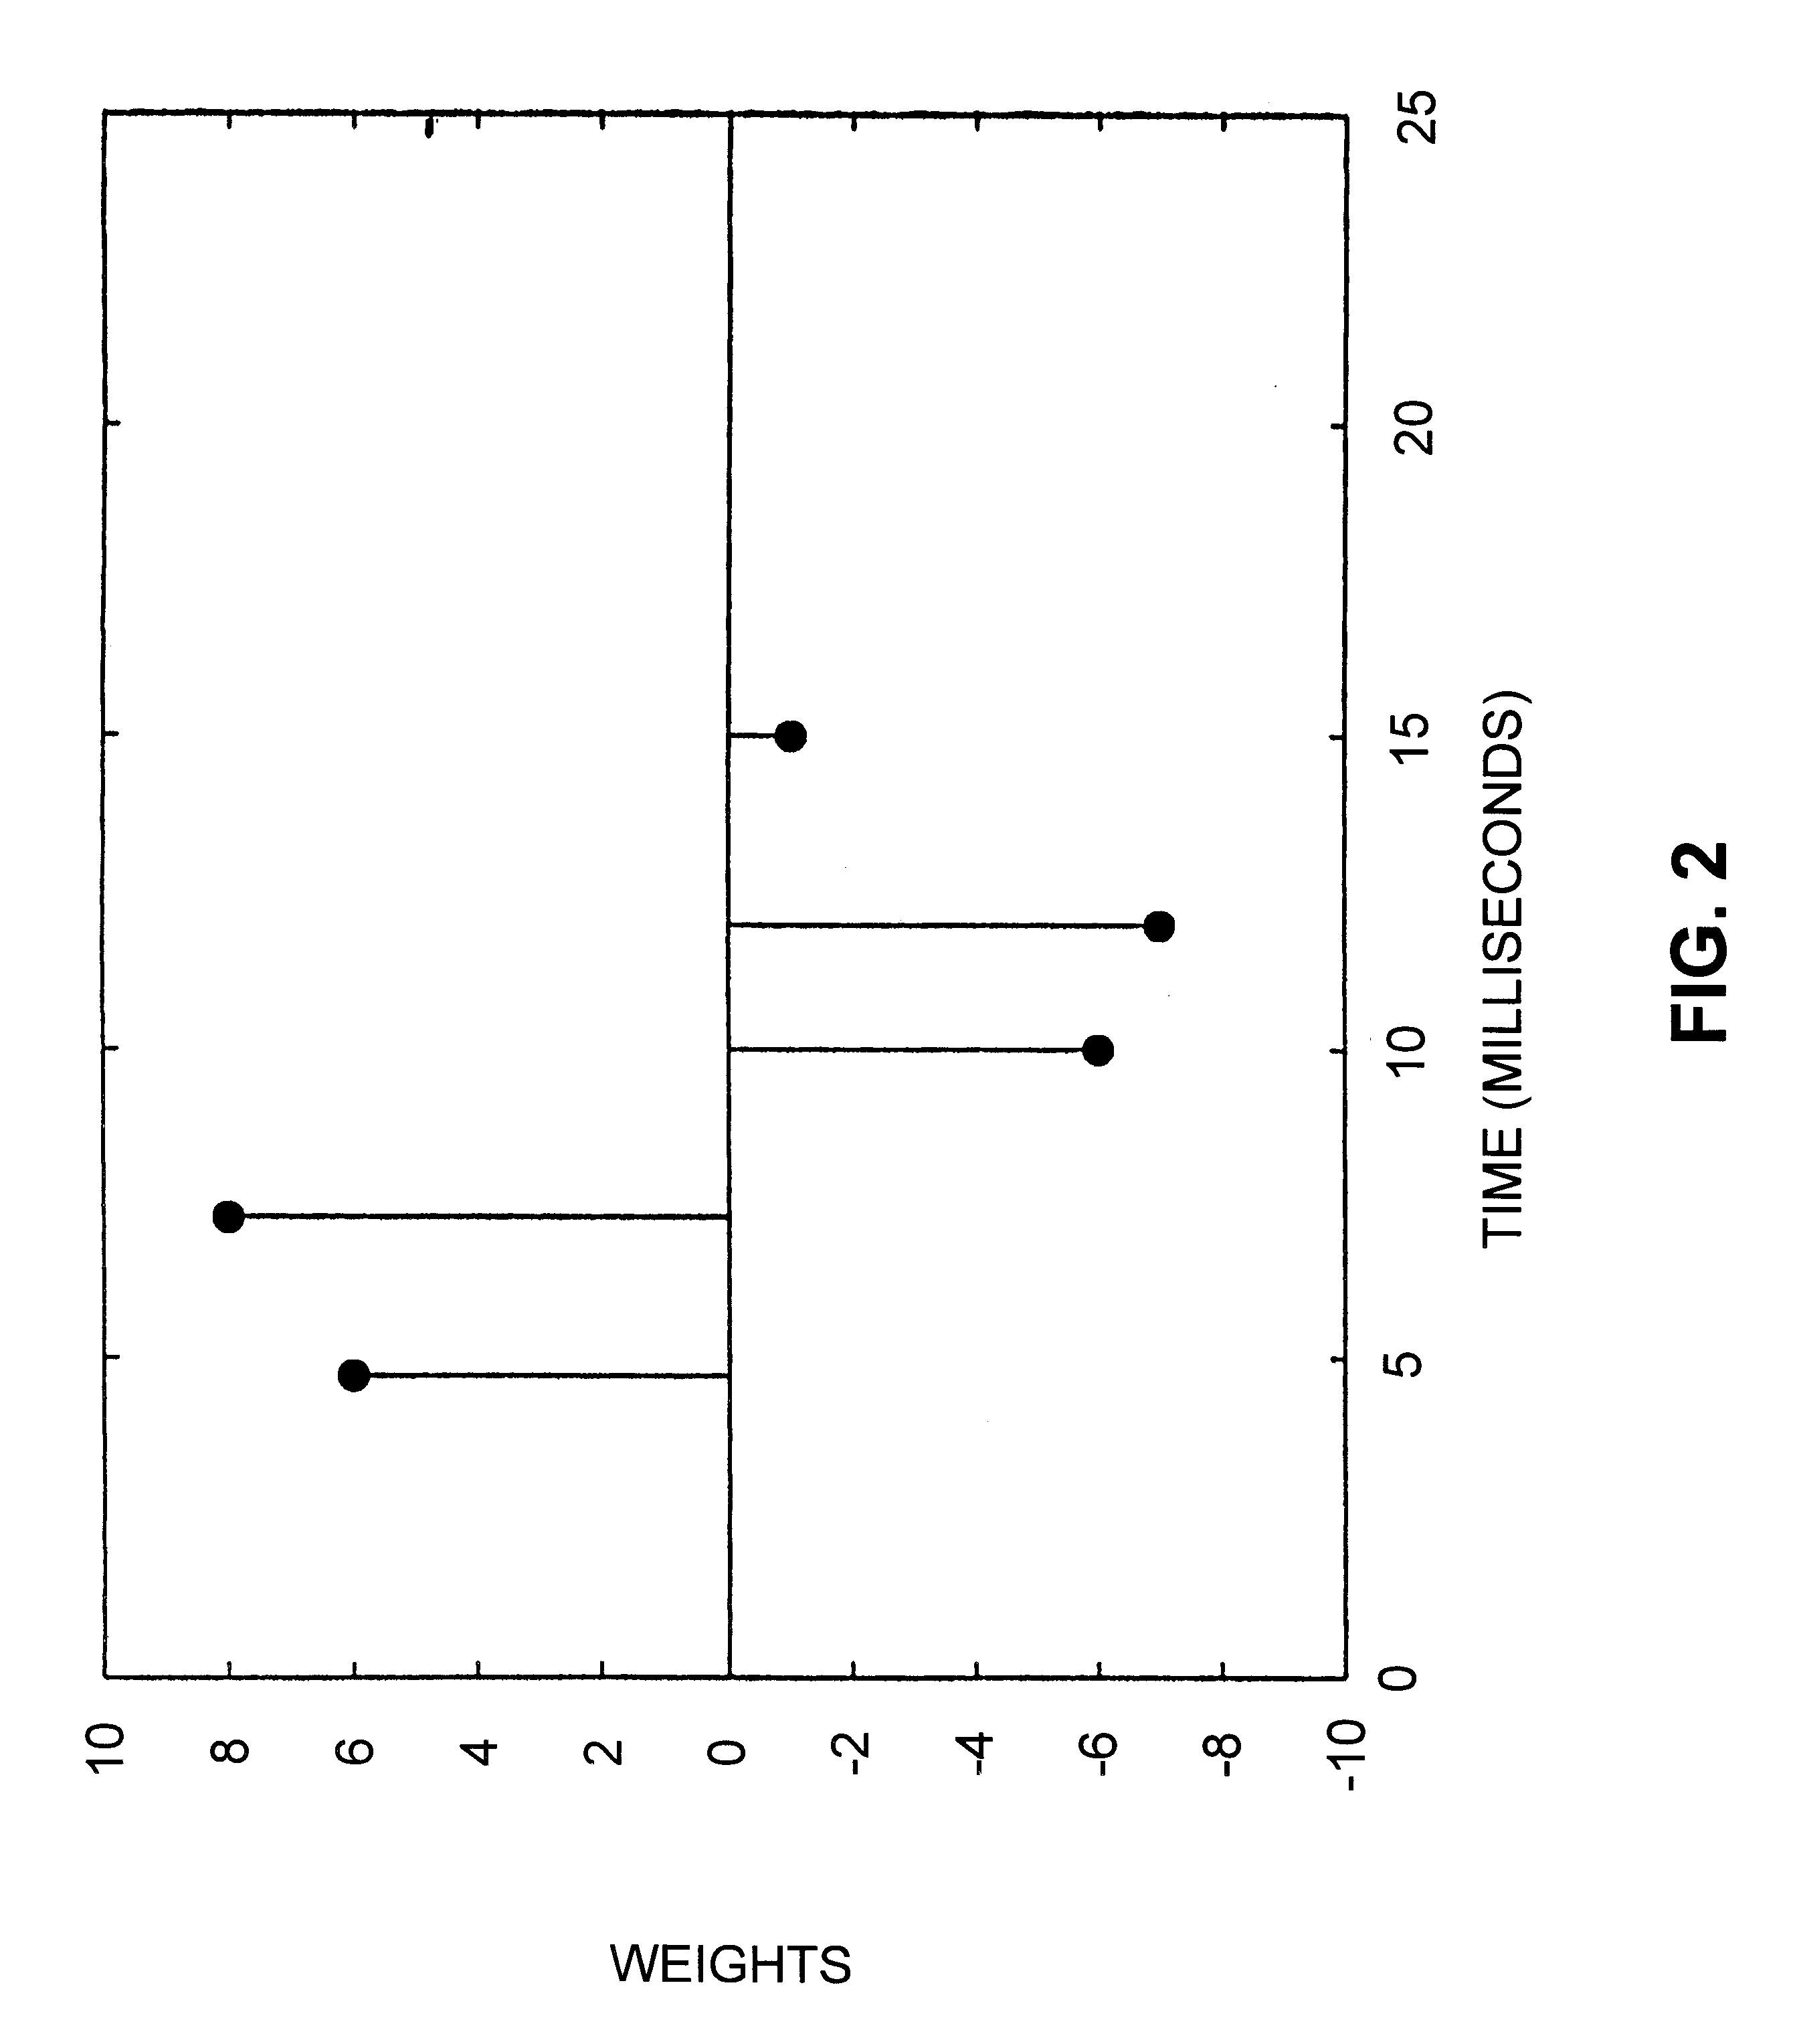 Hearing evaluation device with patient connection evaluation capabilities